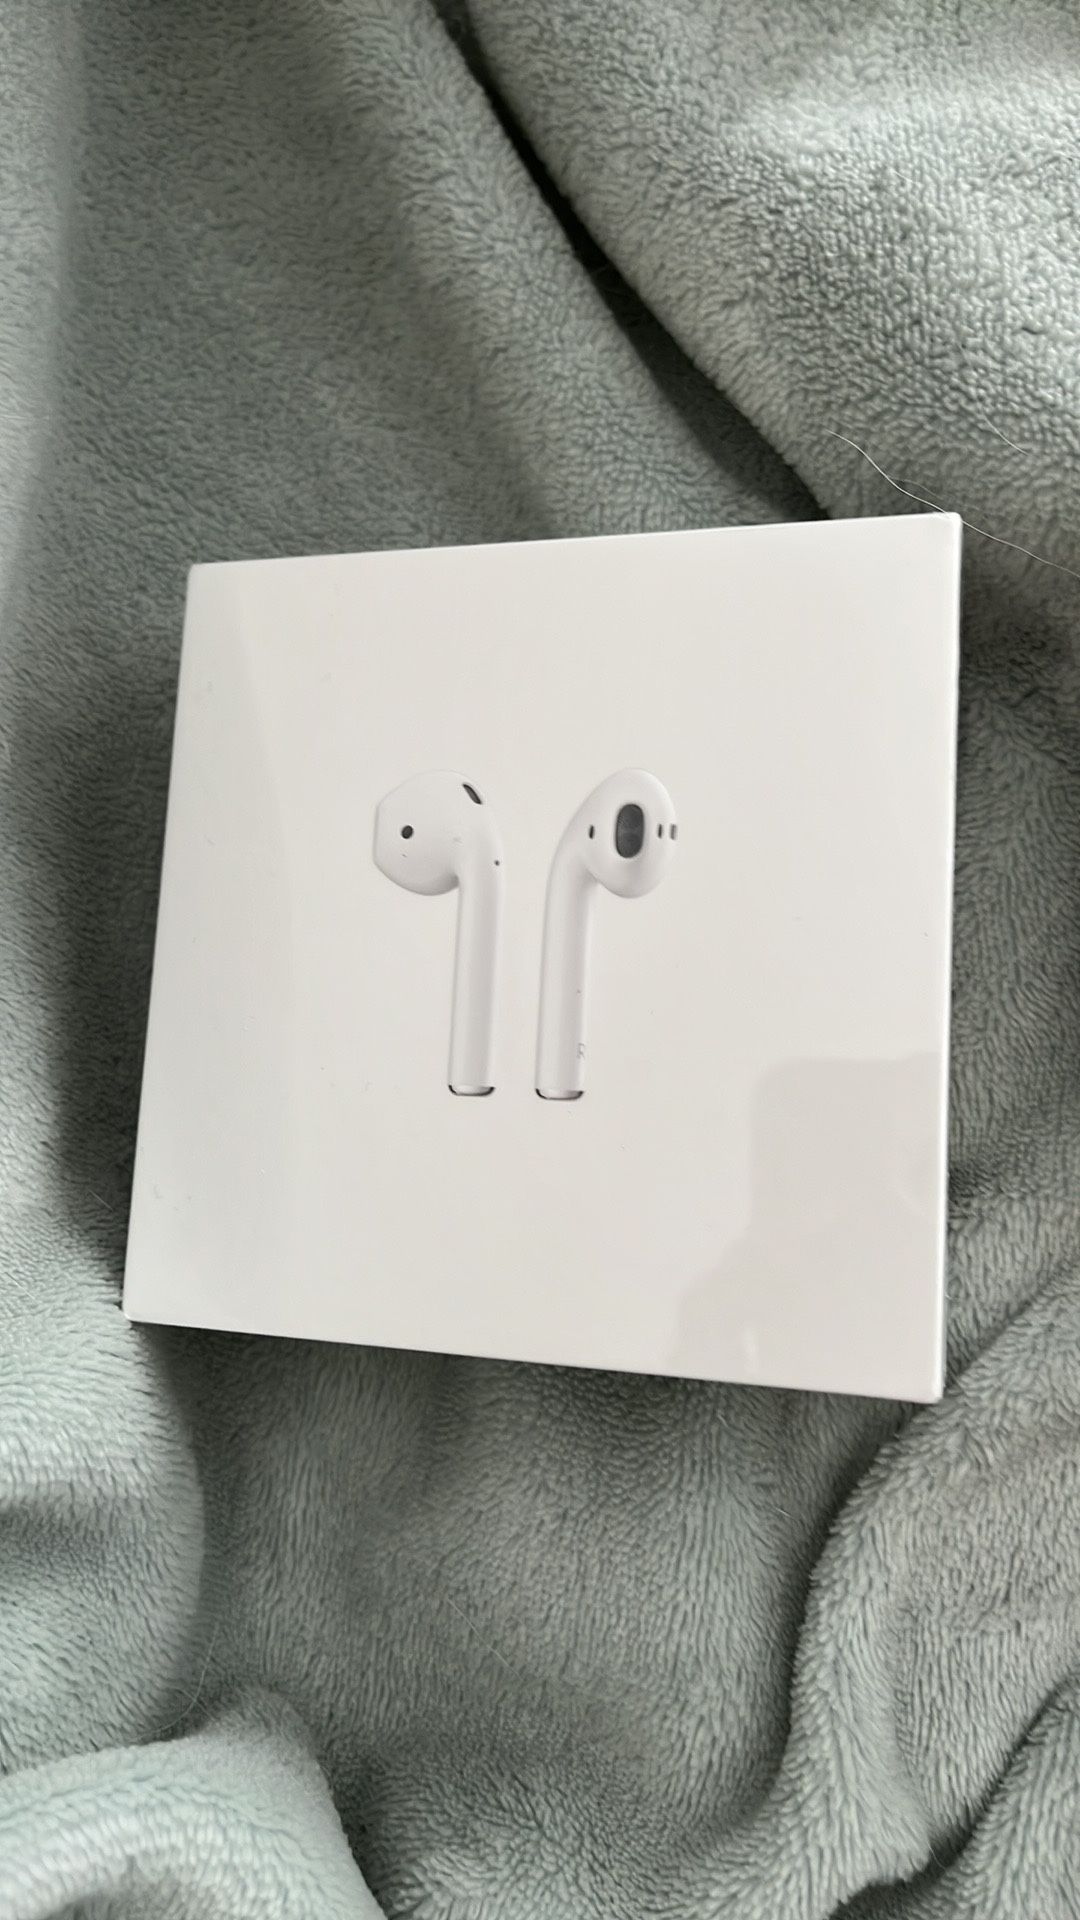 NWT Apple AirPods 